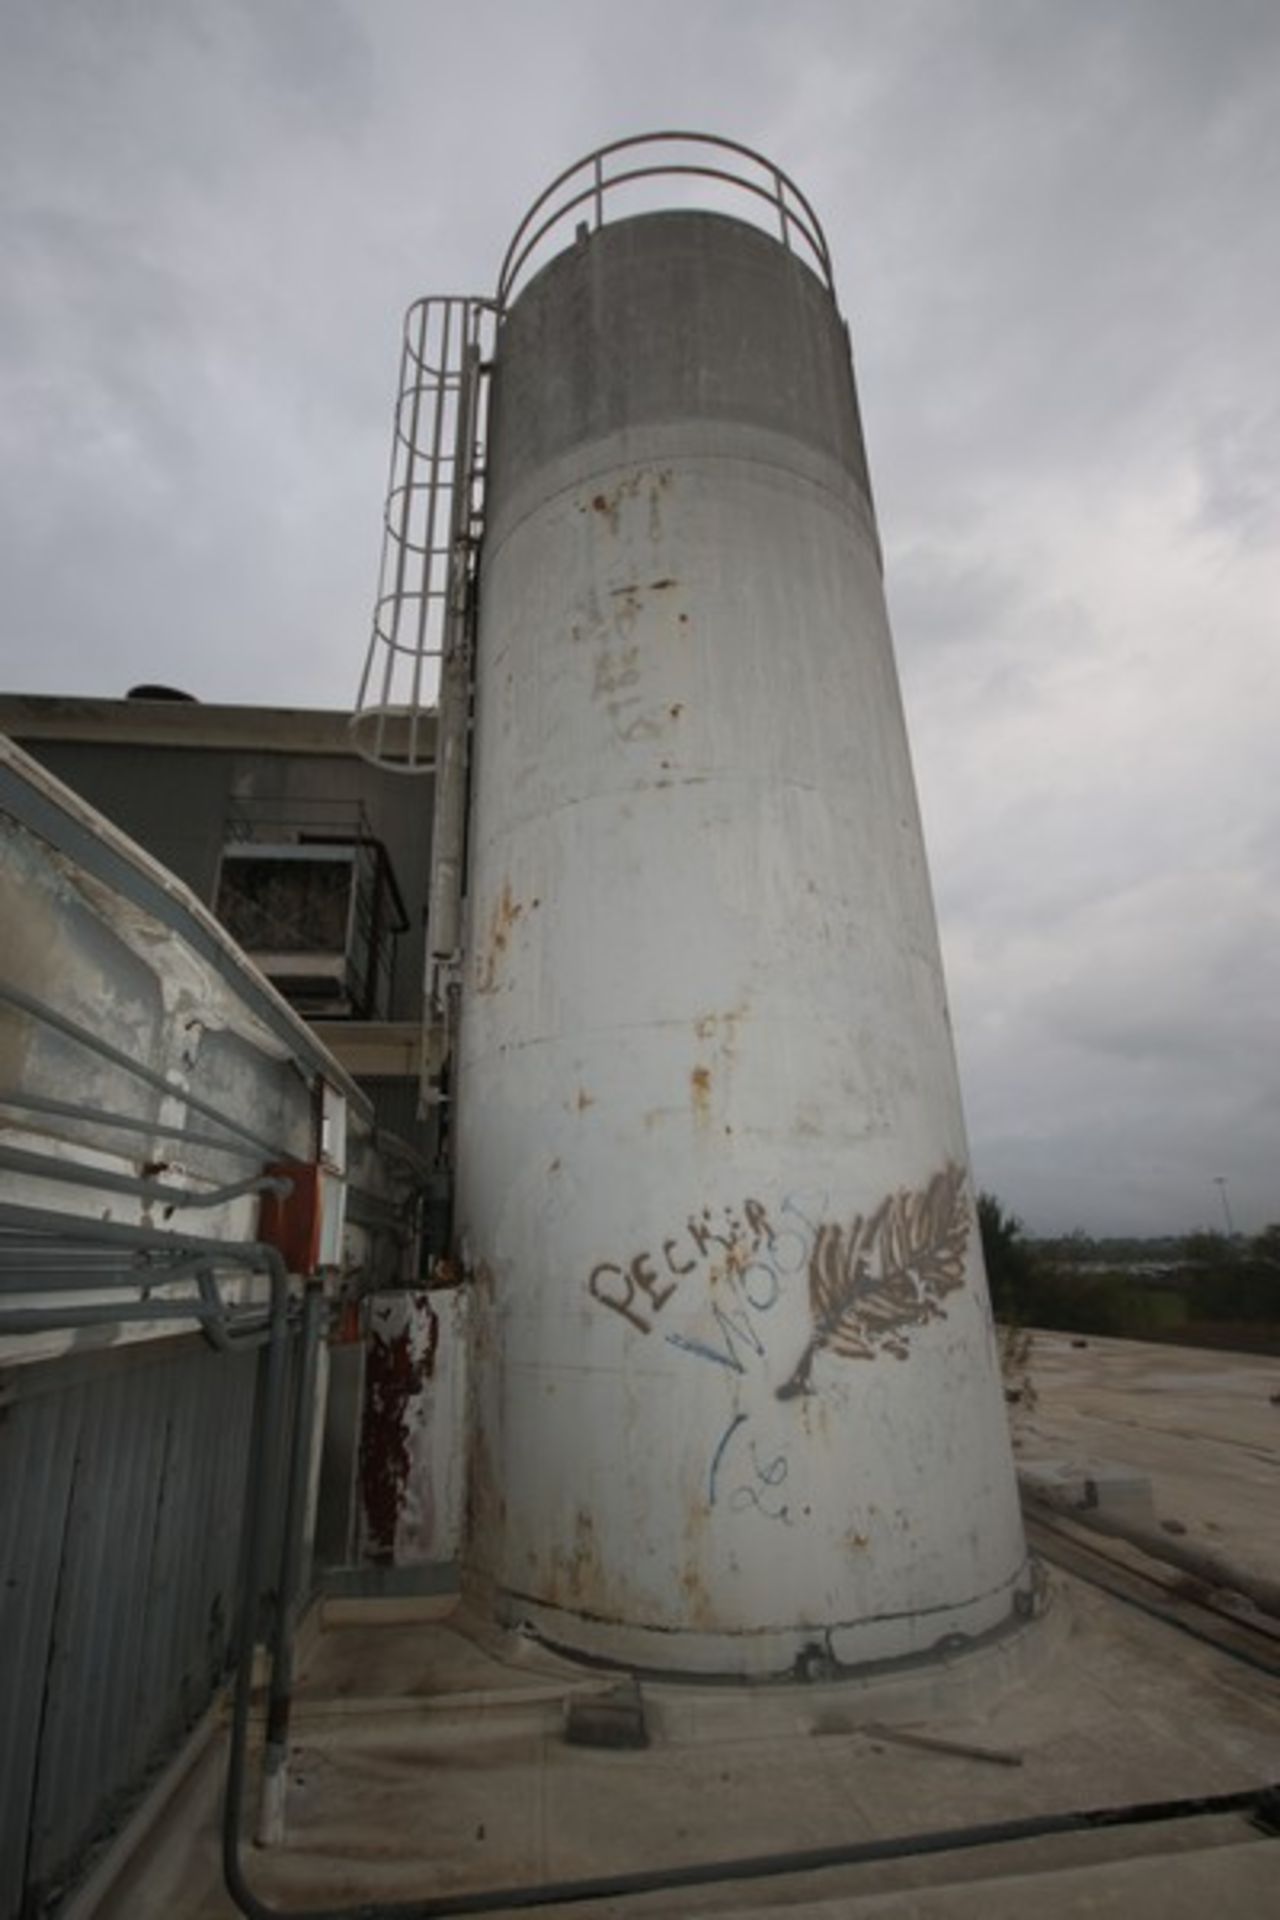 Aprox. 20,000 Gal. S/S Silo, Silo Dims.: Aprox. 11' Dia. x 30' Tall, with Inverted Dish Bottom, - Image 4 of 14